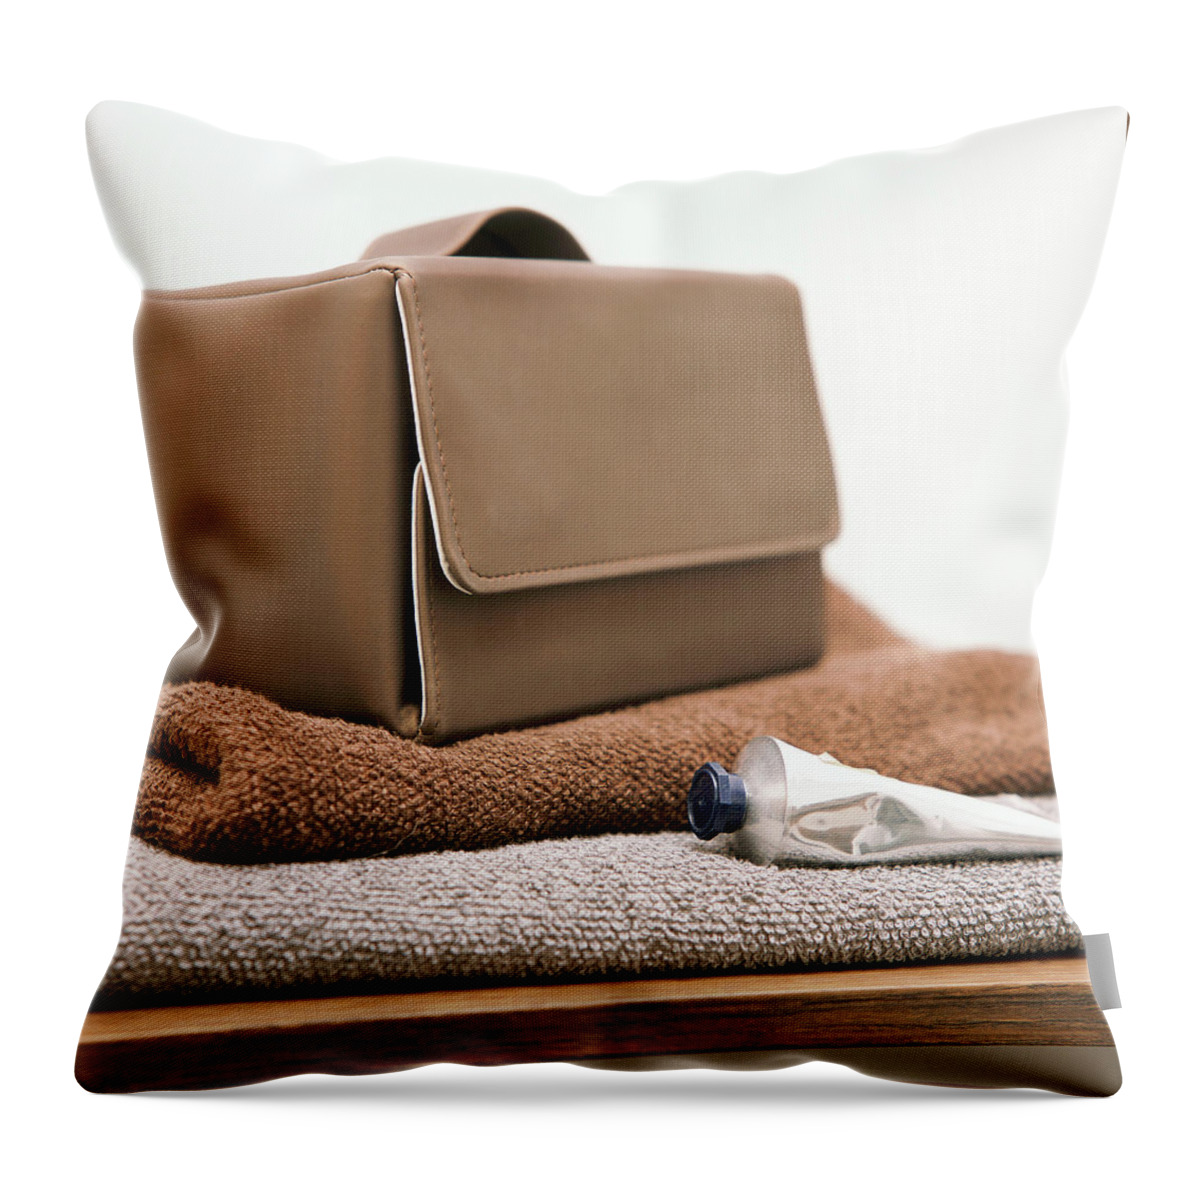 Ip_00340361 Throw Pillow featuring the photograph A Sponge Bag On Towels by Luc Wauman